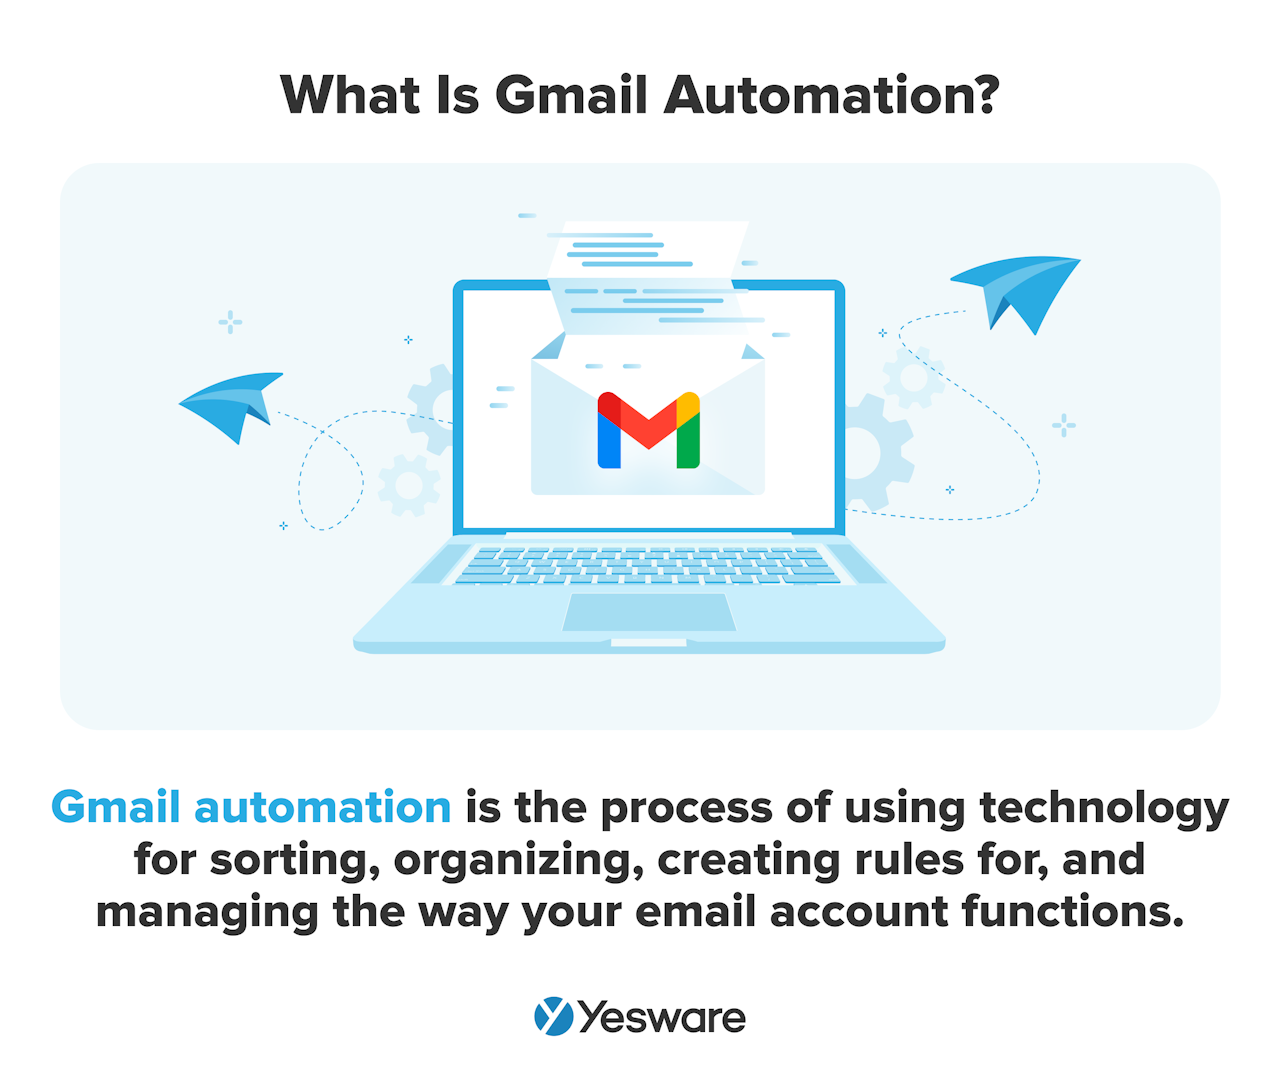 what is Gmail automation?